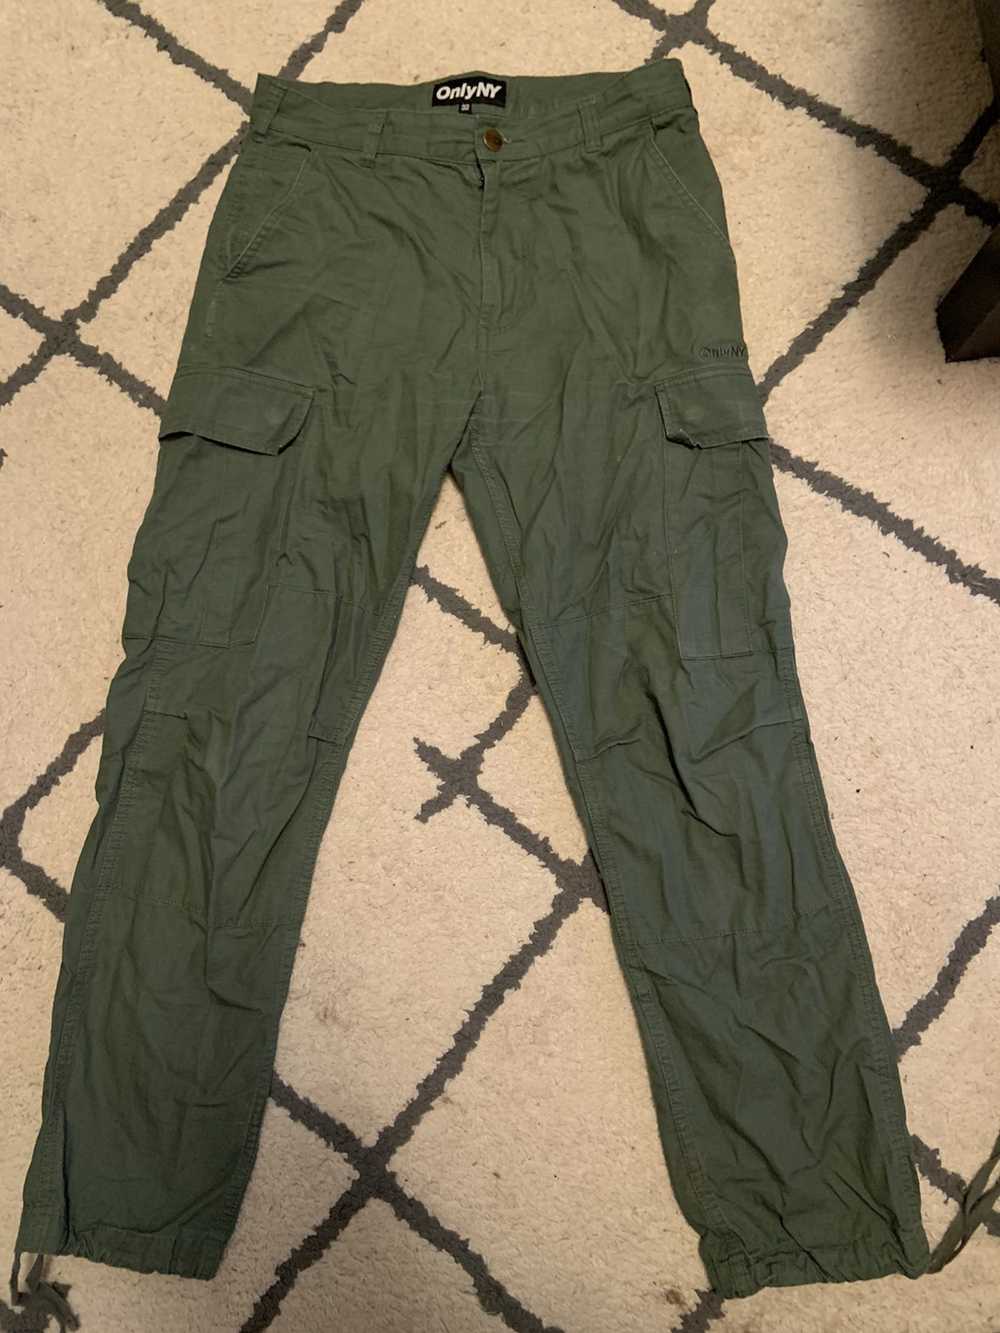 Only NY BRUCKNER RIPSTOP CARGO PANTS - image 1